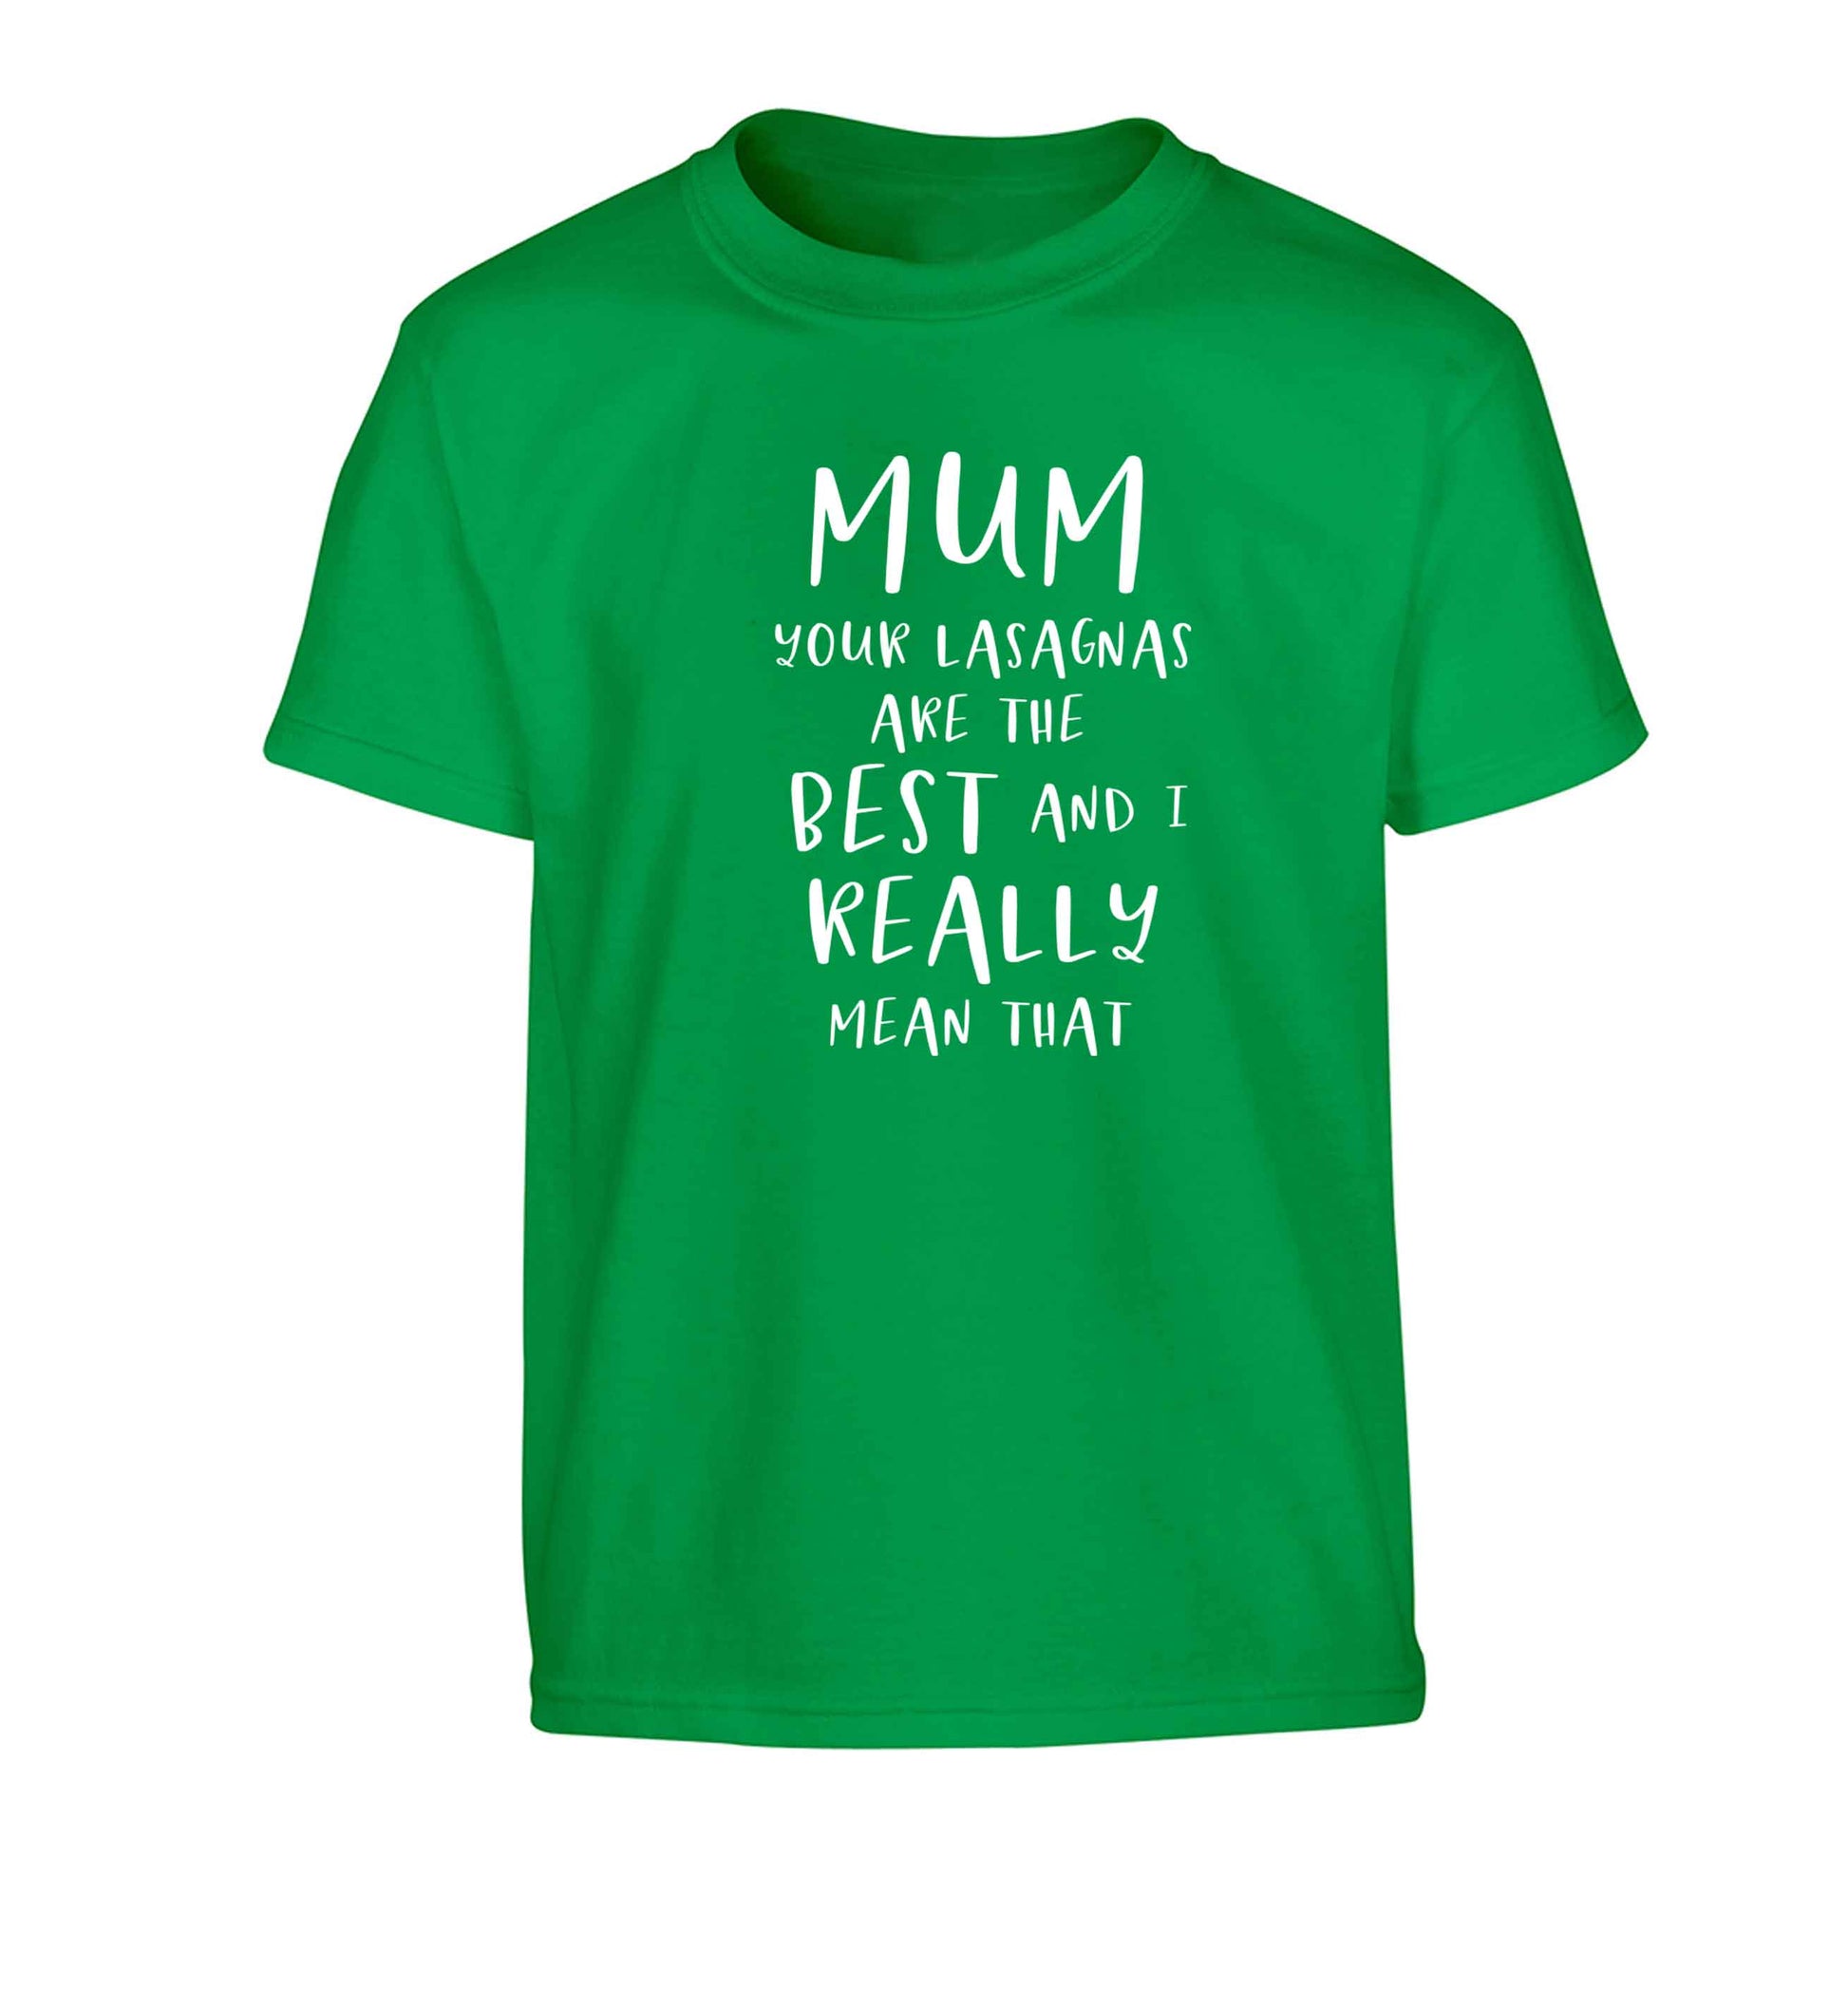 Funny gifts for your mum on mother's dayor her birthday! Mum your lasagnas are the best and I really mean that Children's green Tshirt 12-13 Years